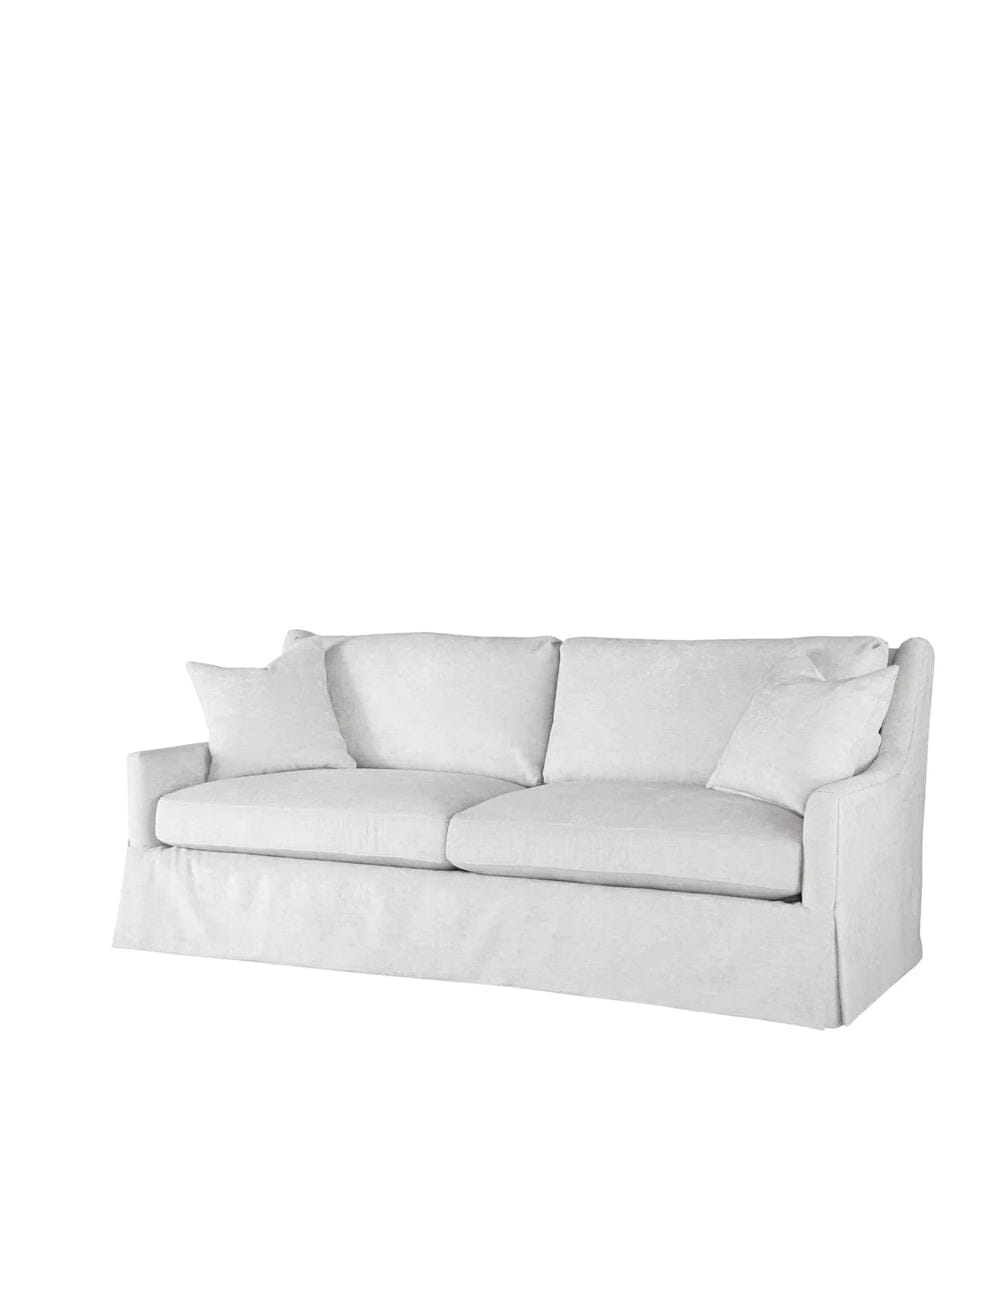 Green Hills 87" Performance Fabric Sofa by Huck & Peck SOFA Huck and Peck